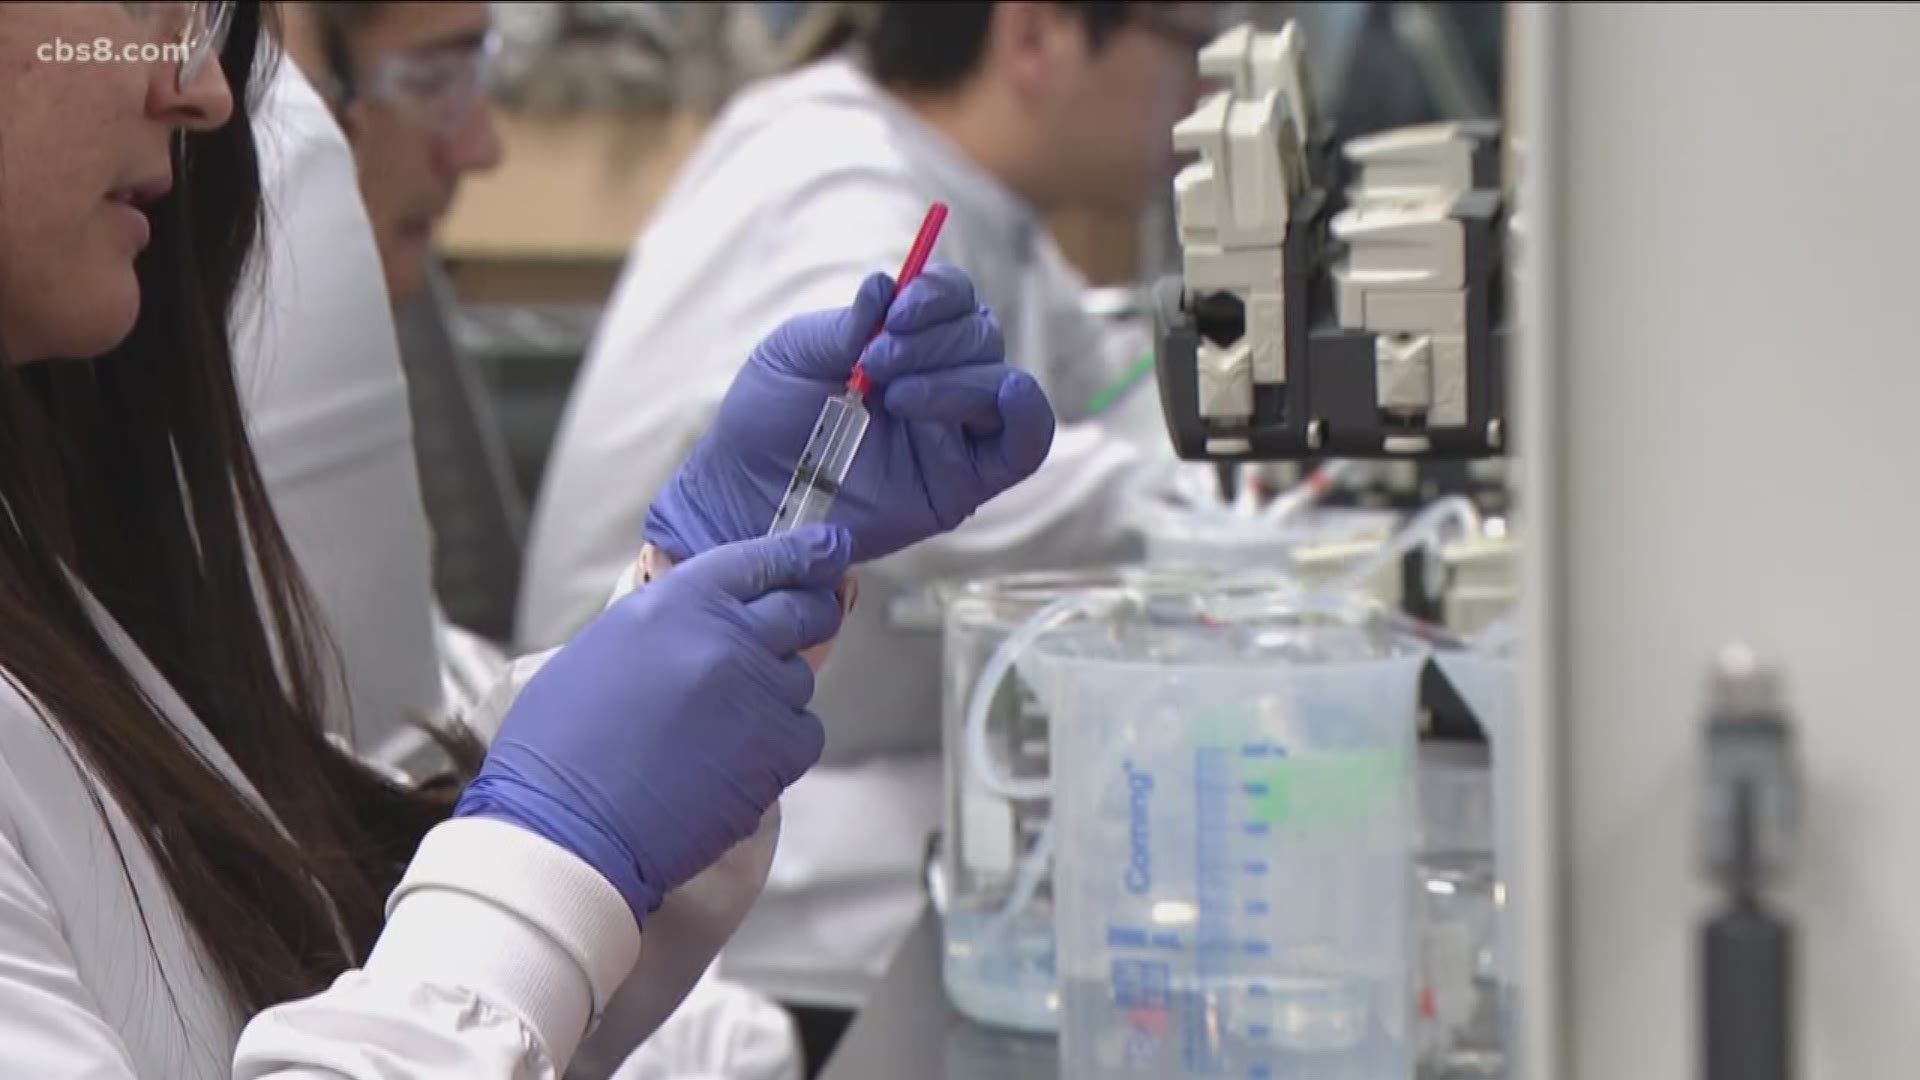 The San Diego biotech company has identified a vaccine, and is working to manufacture it. It would need FDA approval.